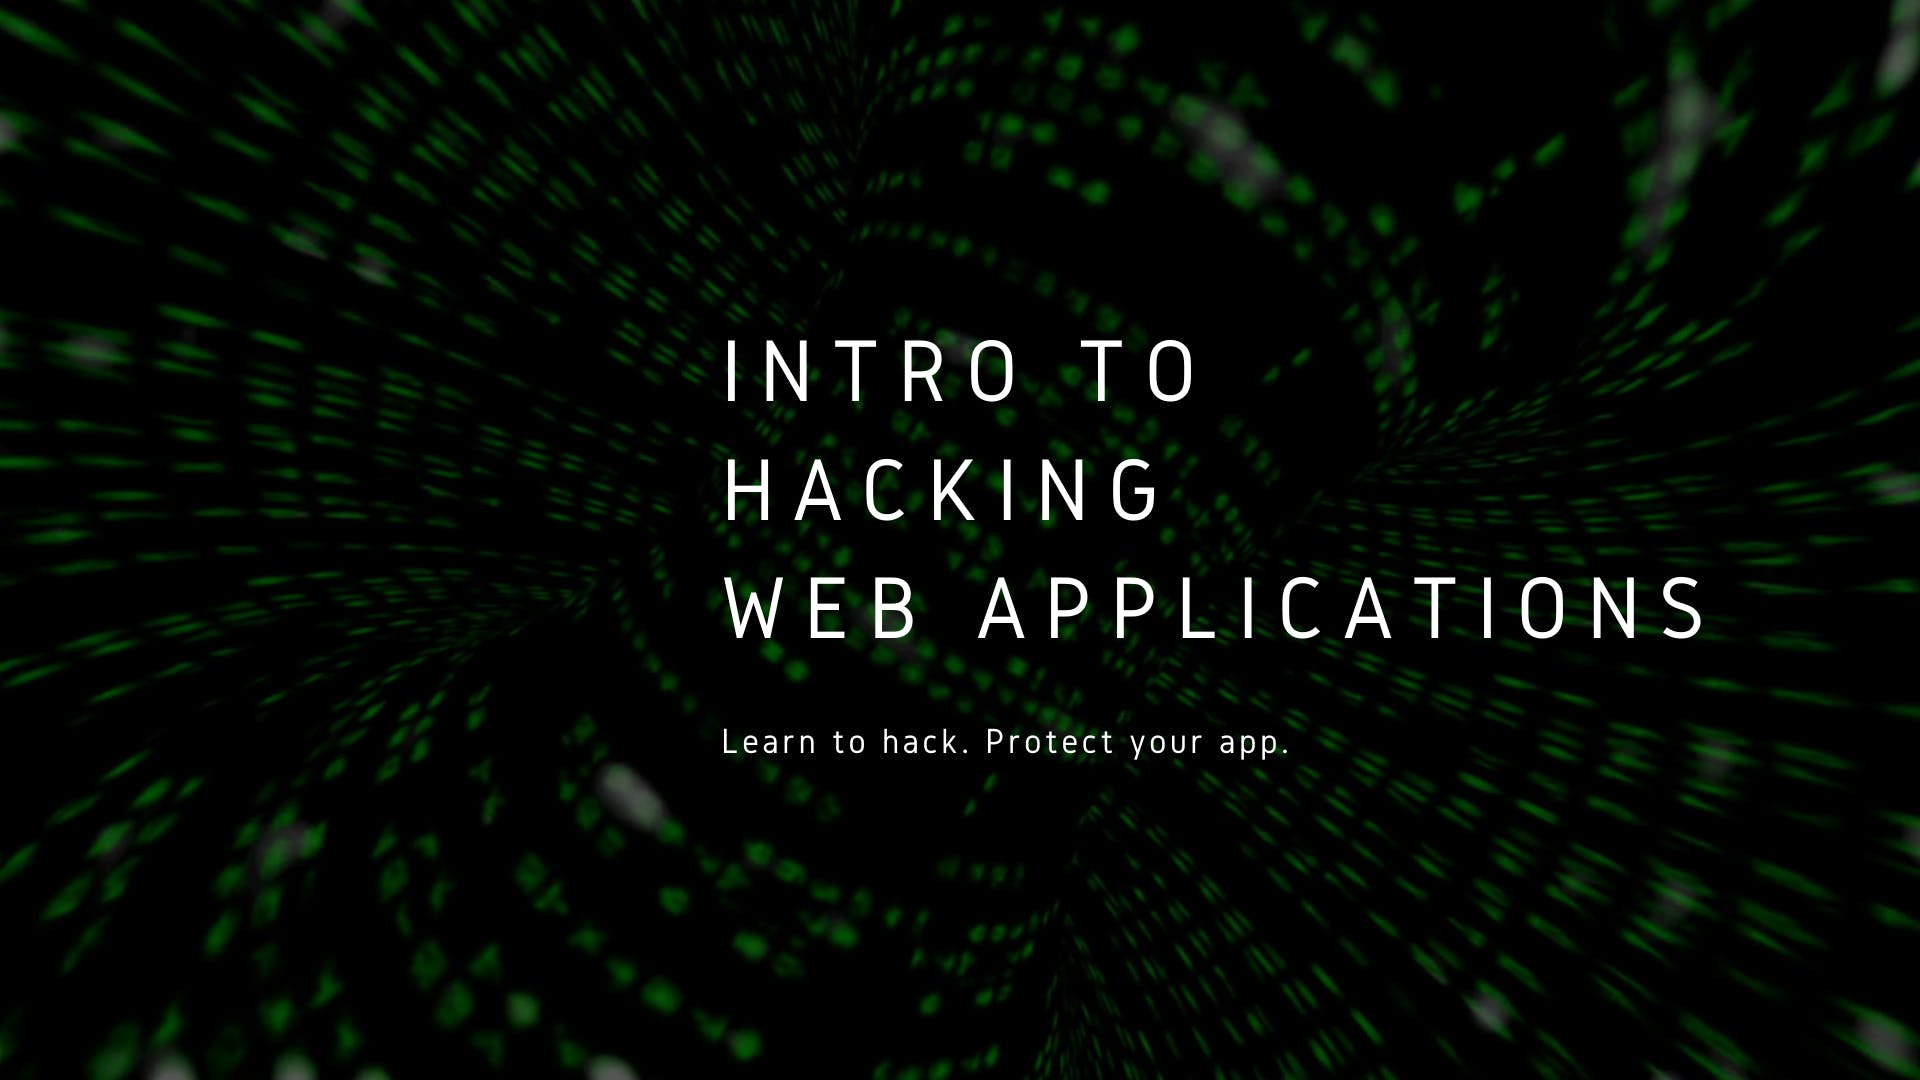 Intro to Hacking Web Applications media 1